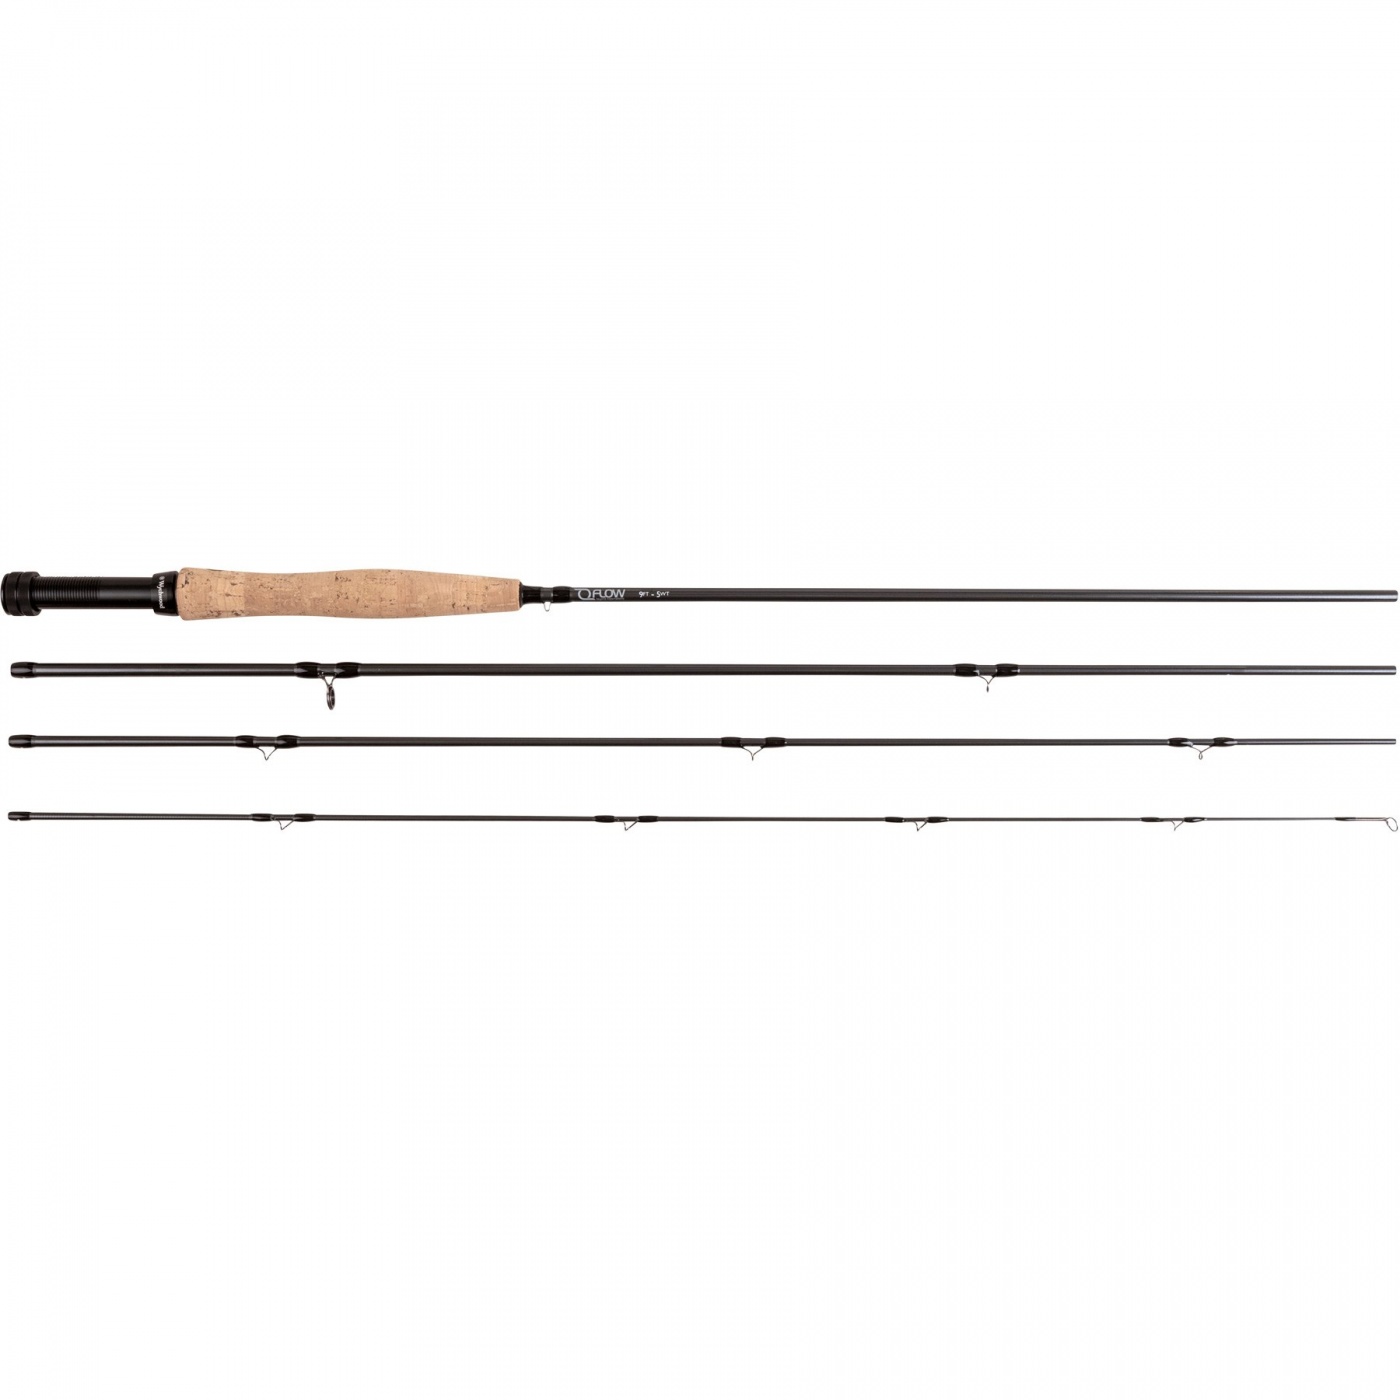 Wychwood Flow Fly Rod 11' #7 Fly Fishing Rod For Trout